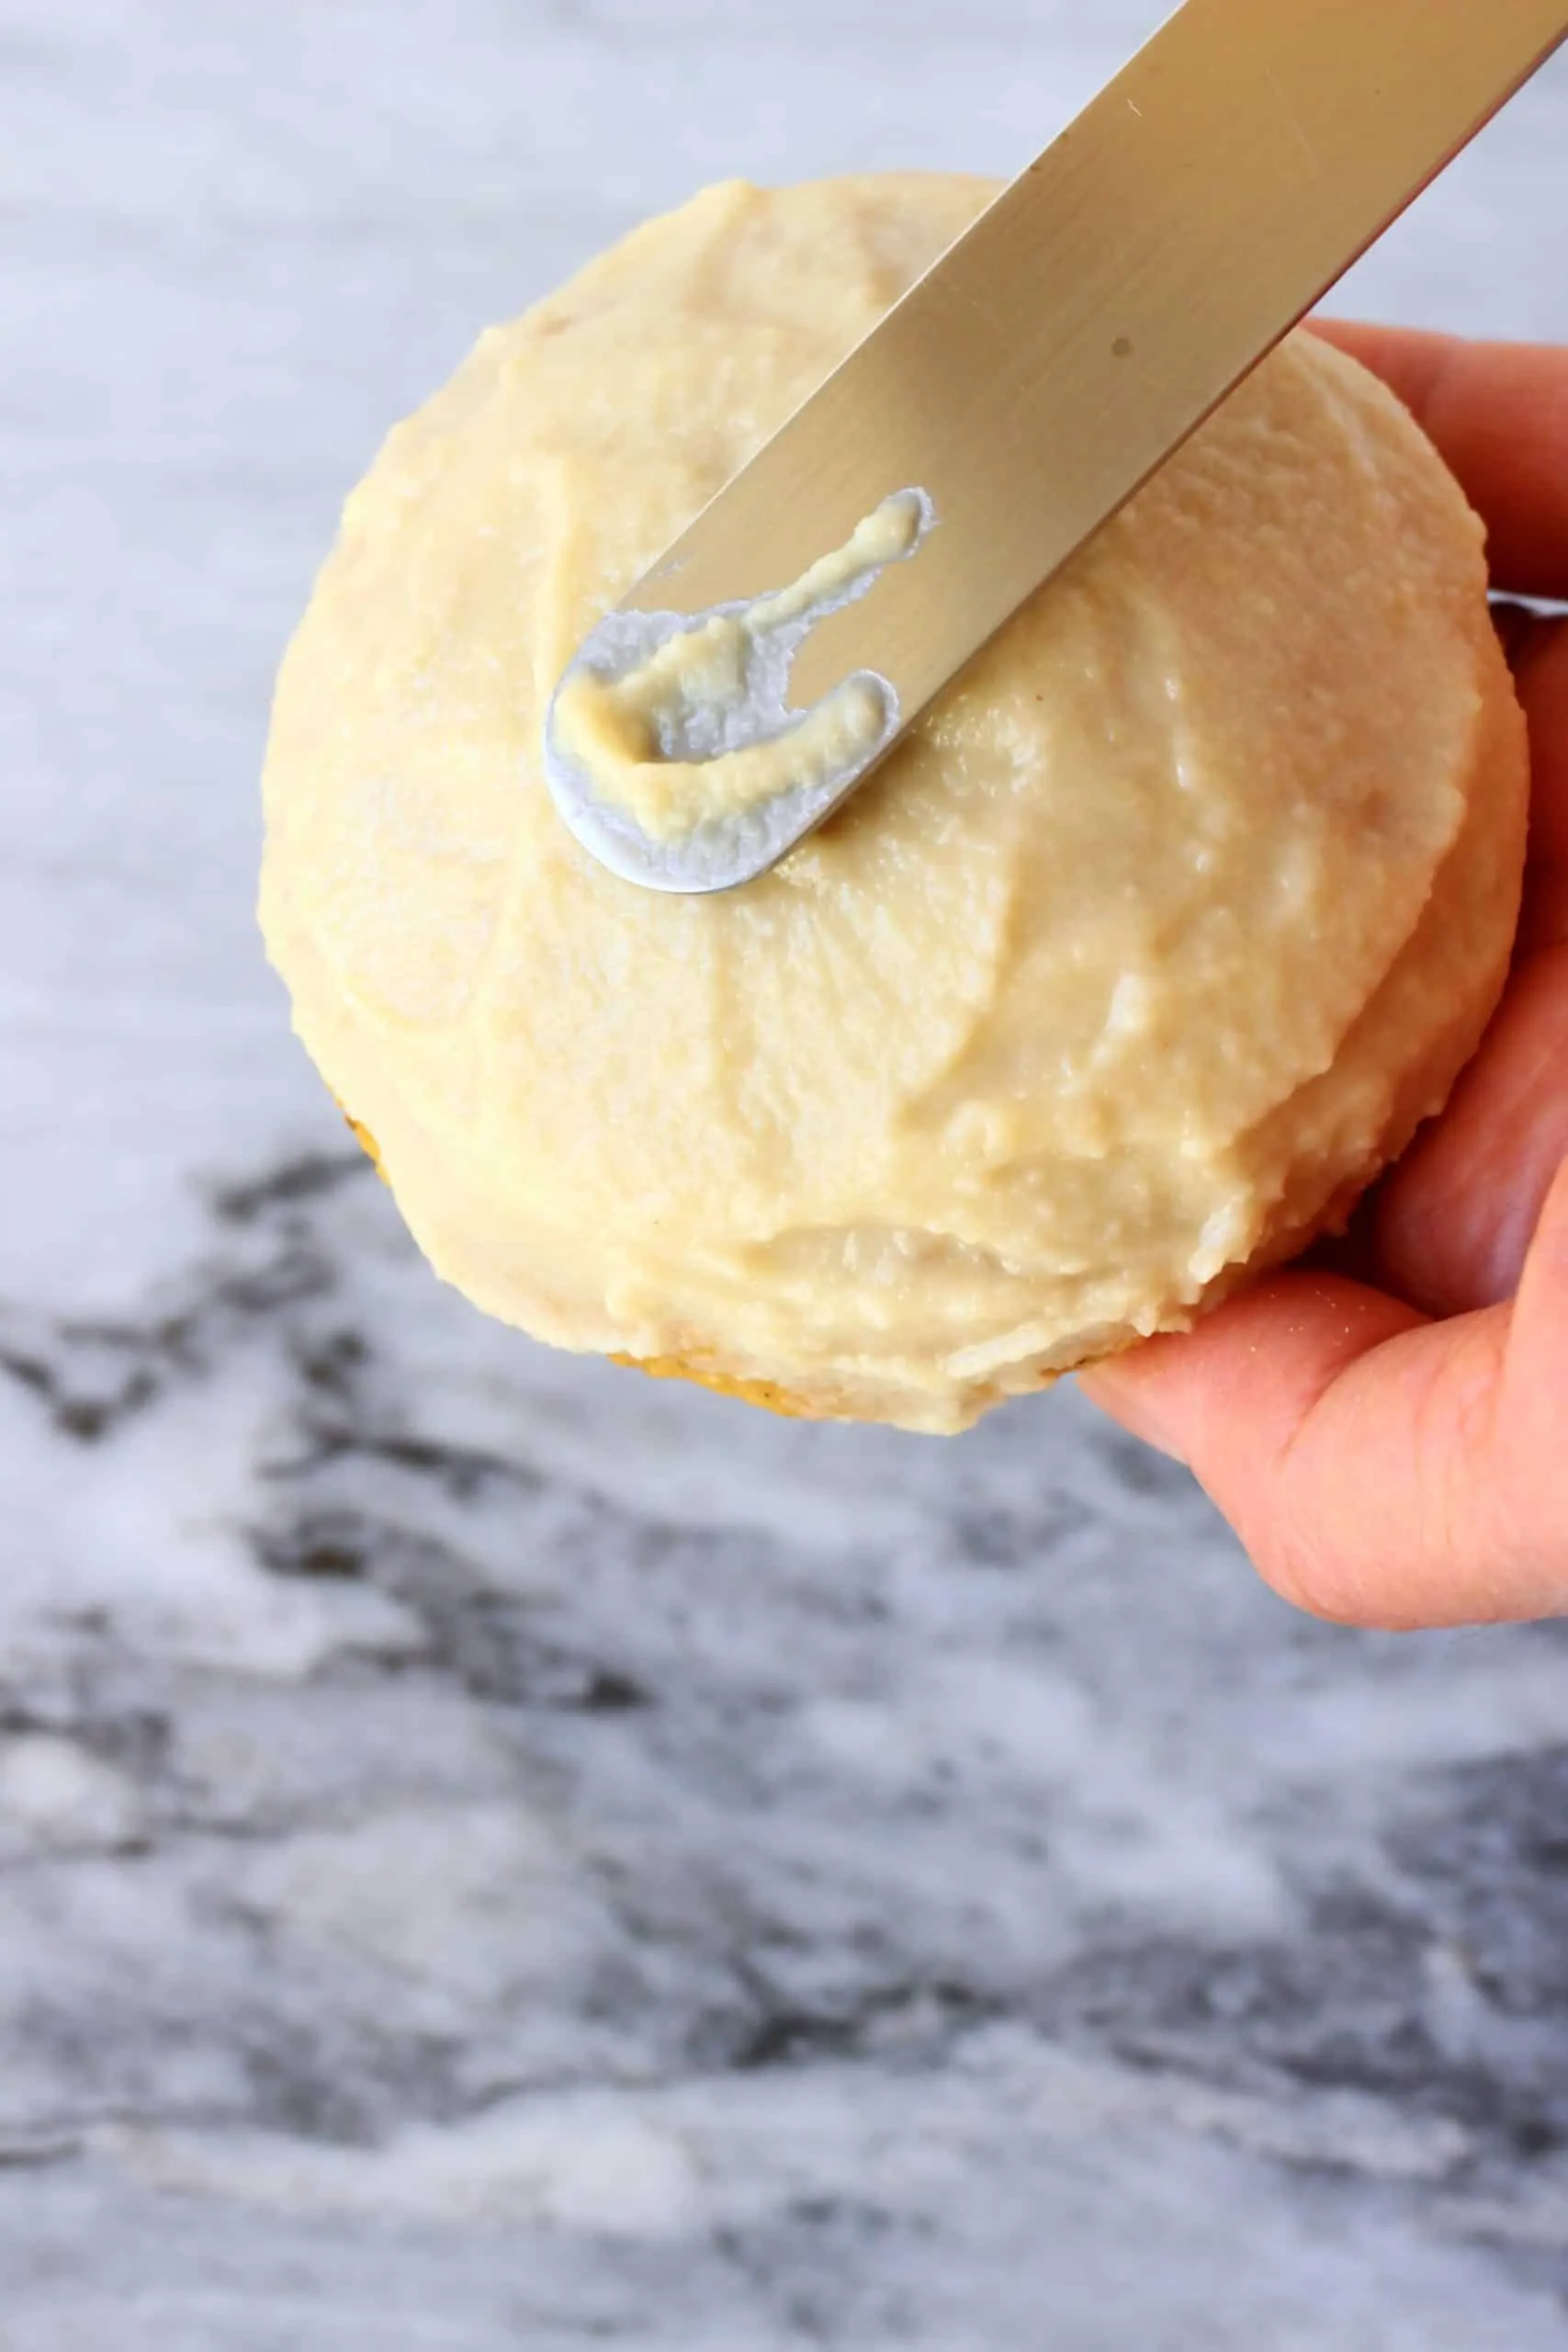 A knife spreading white frosting over a gluten-free vegan pumpkin cookie